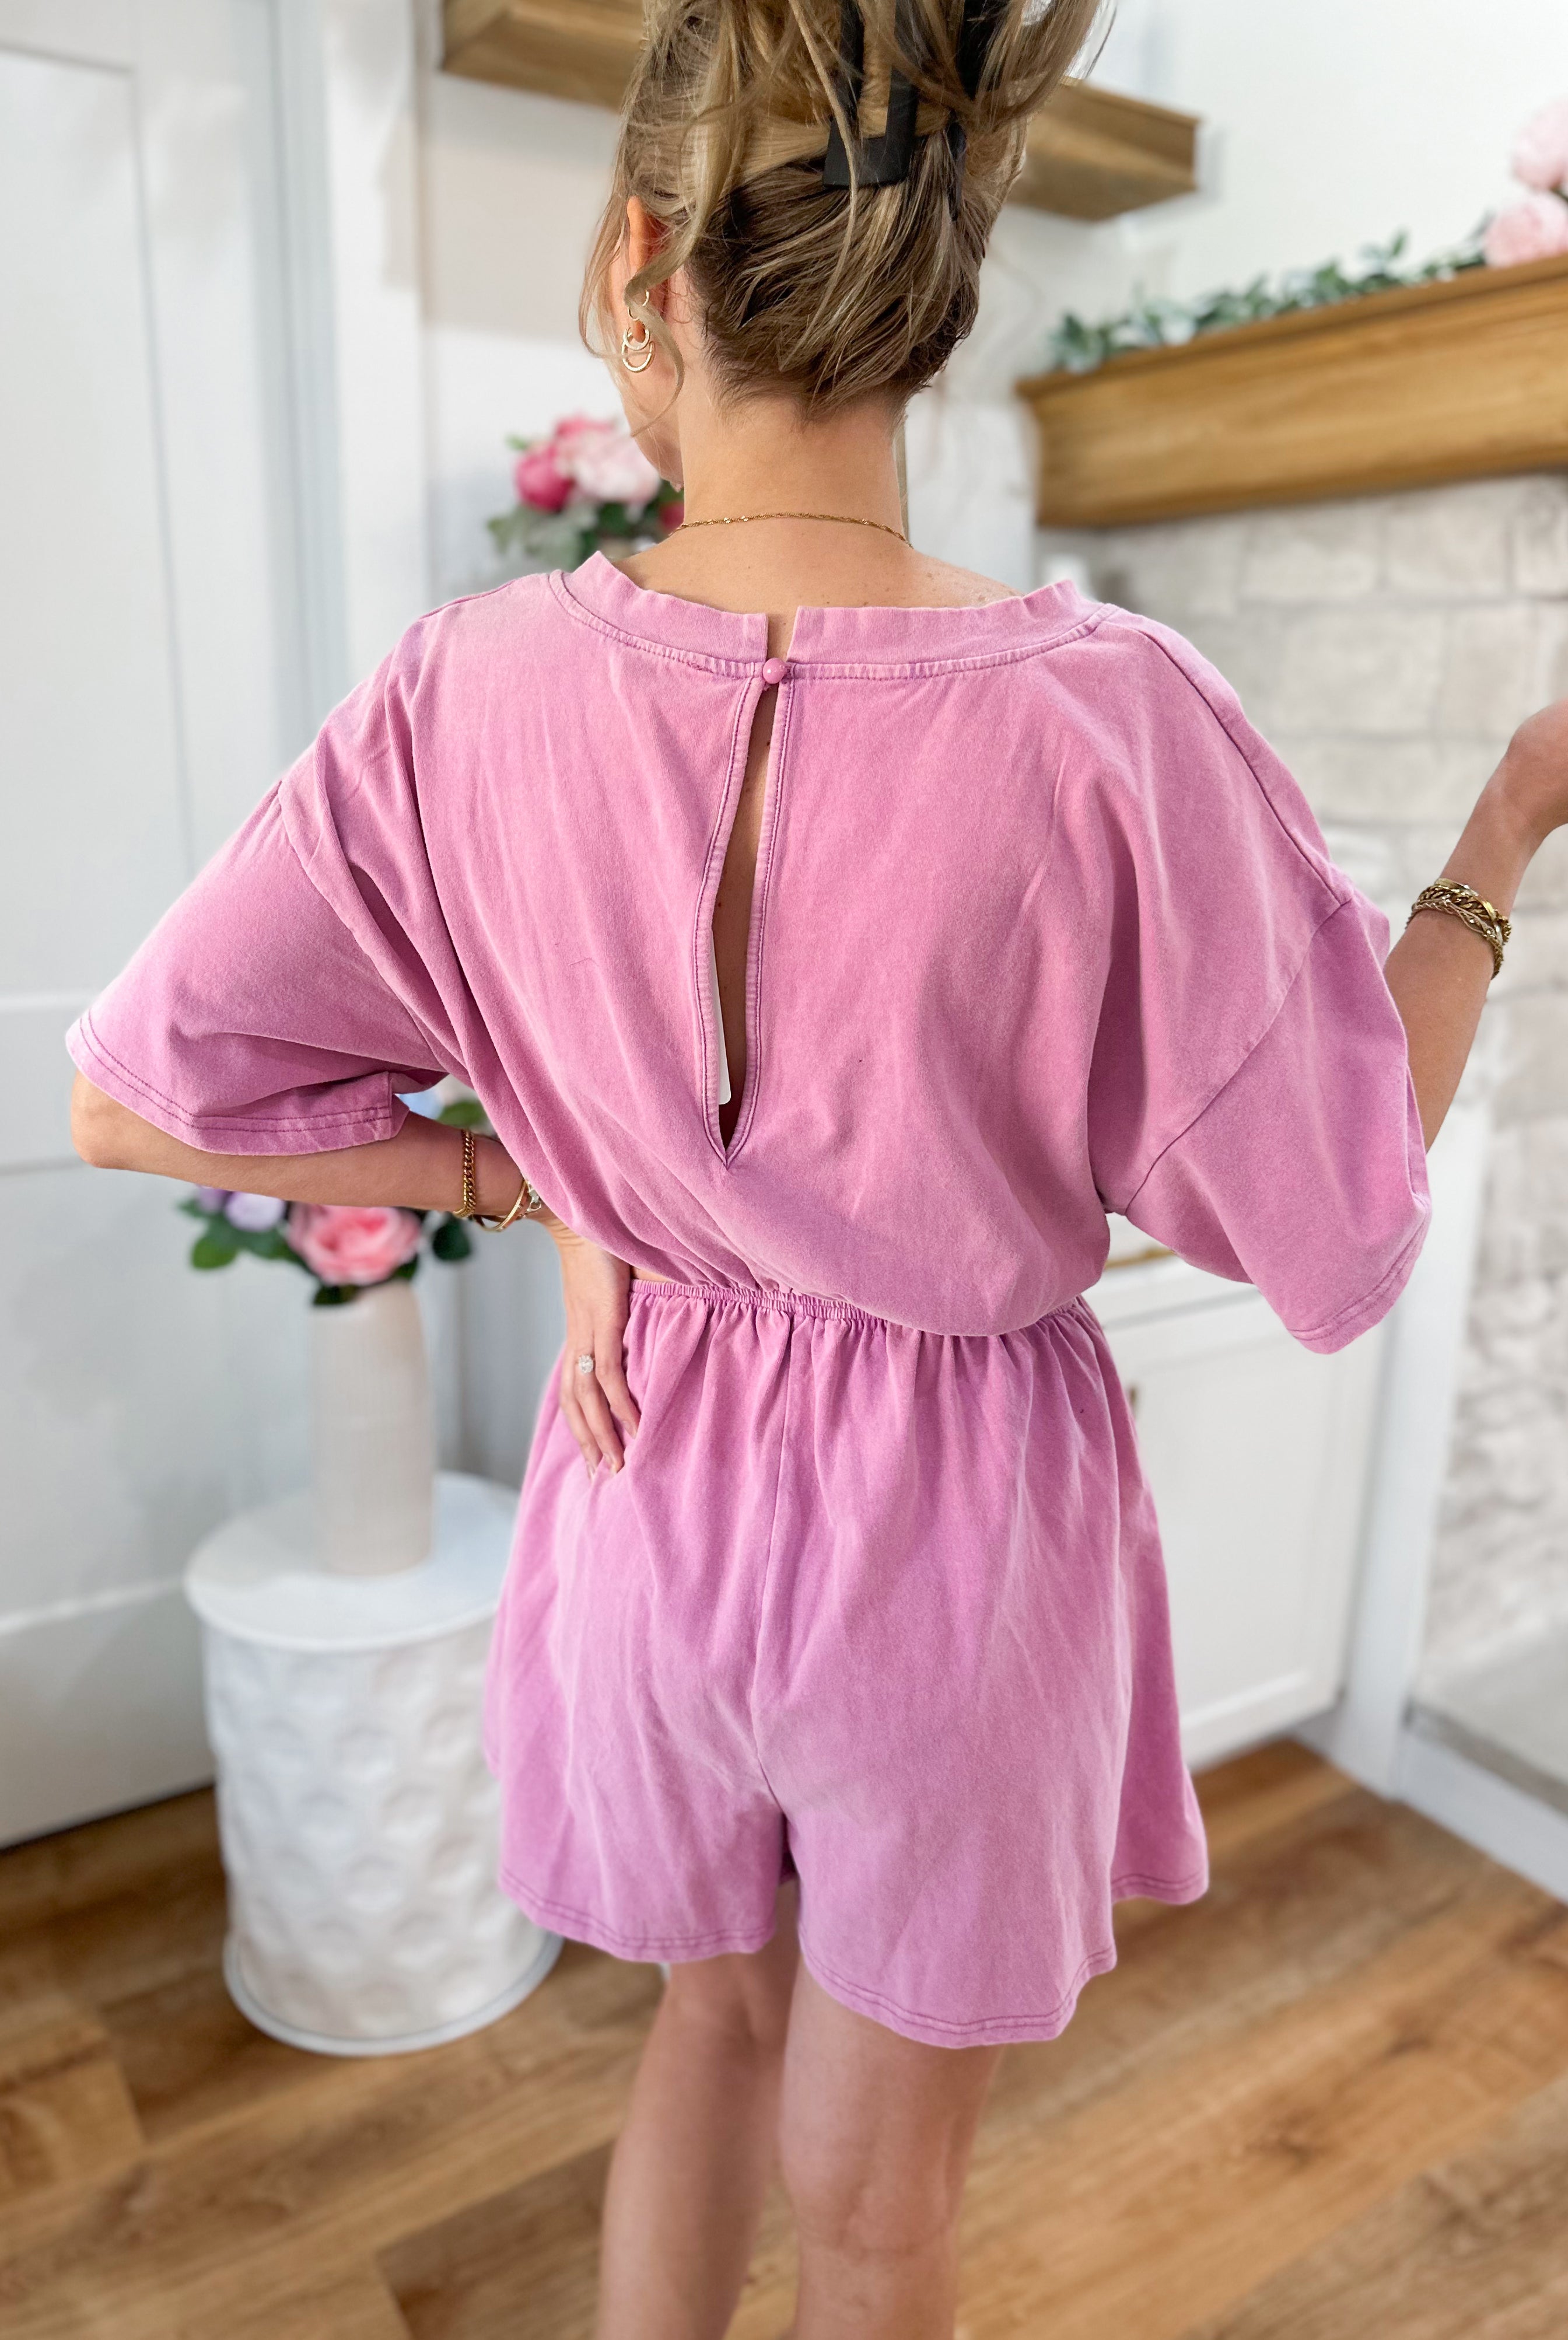 Lonnie Mineral Washed Super Soft Romper - Be You Boutique